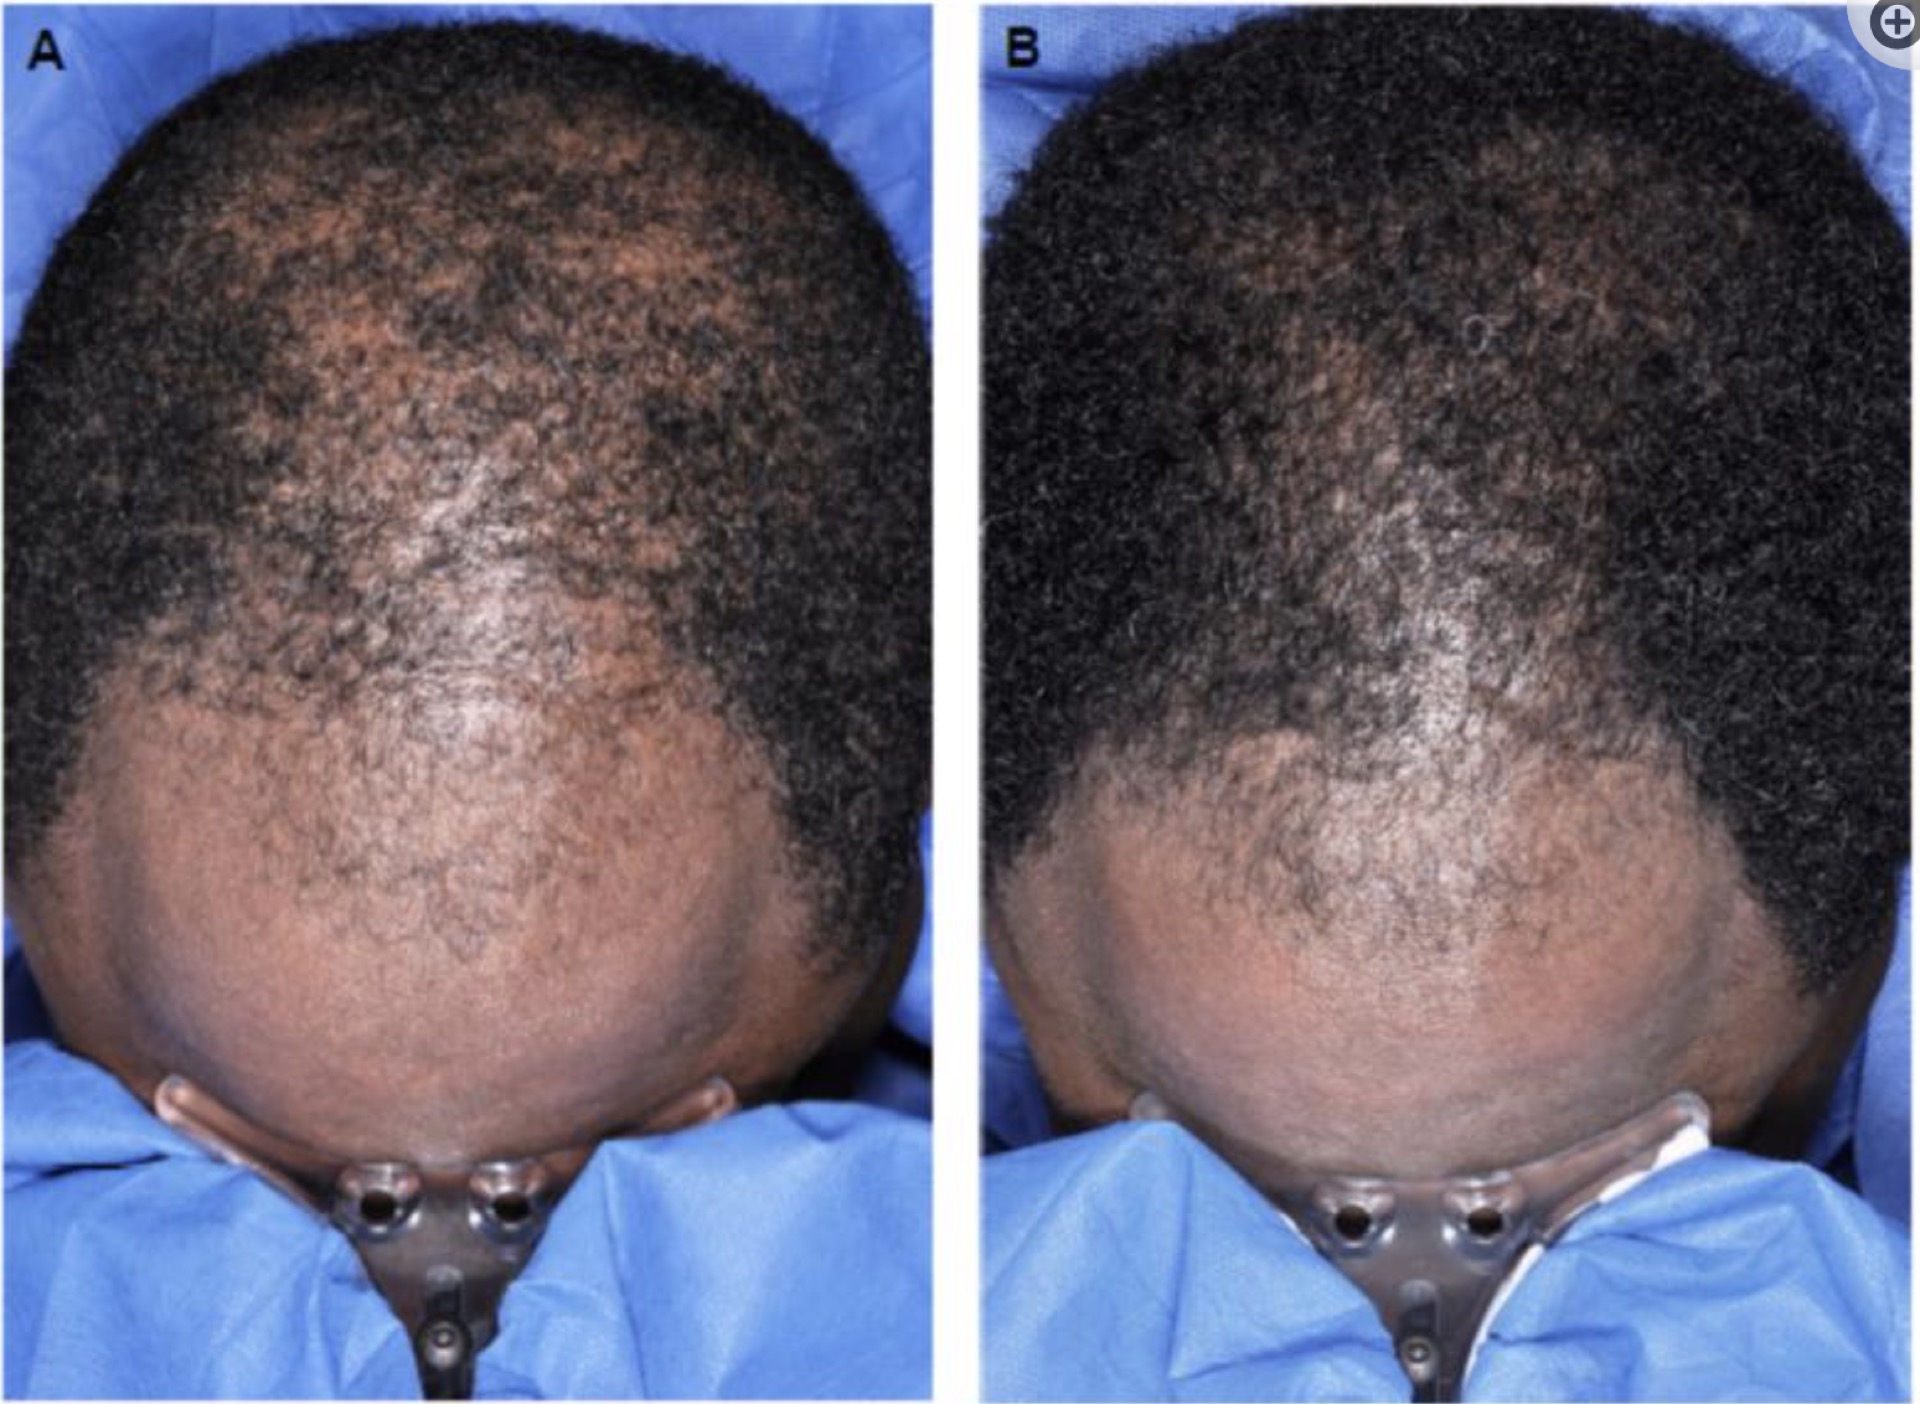 Before and after eight weeks of using 5% Minoxidil foam twice a day